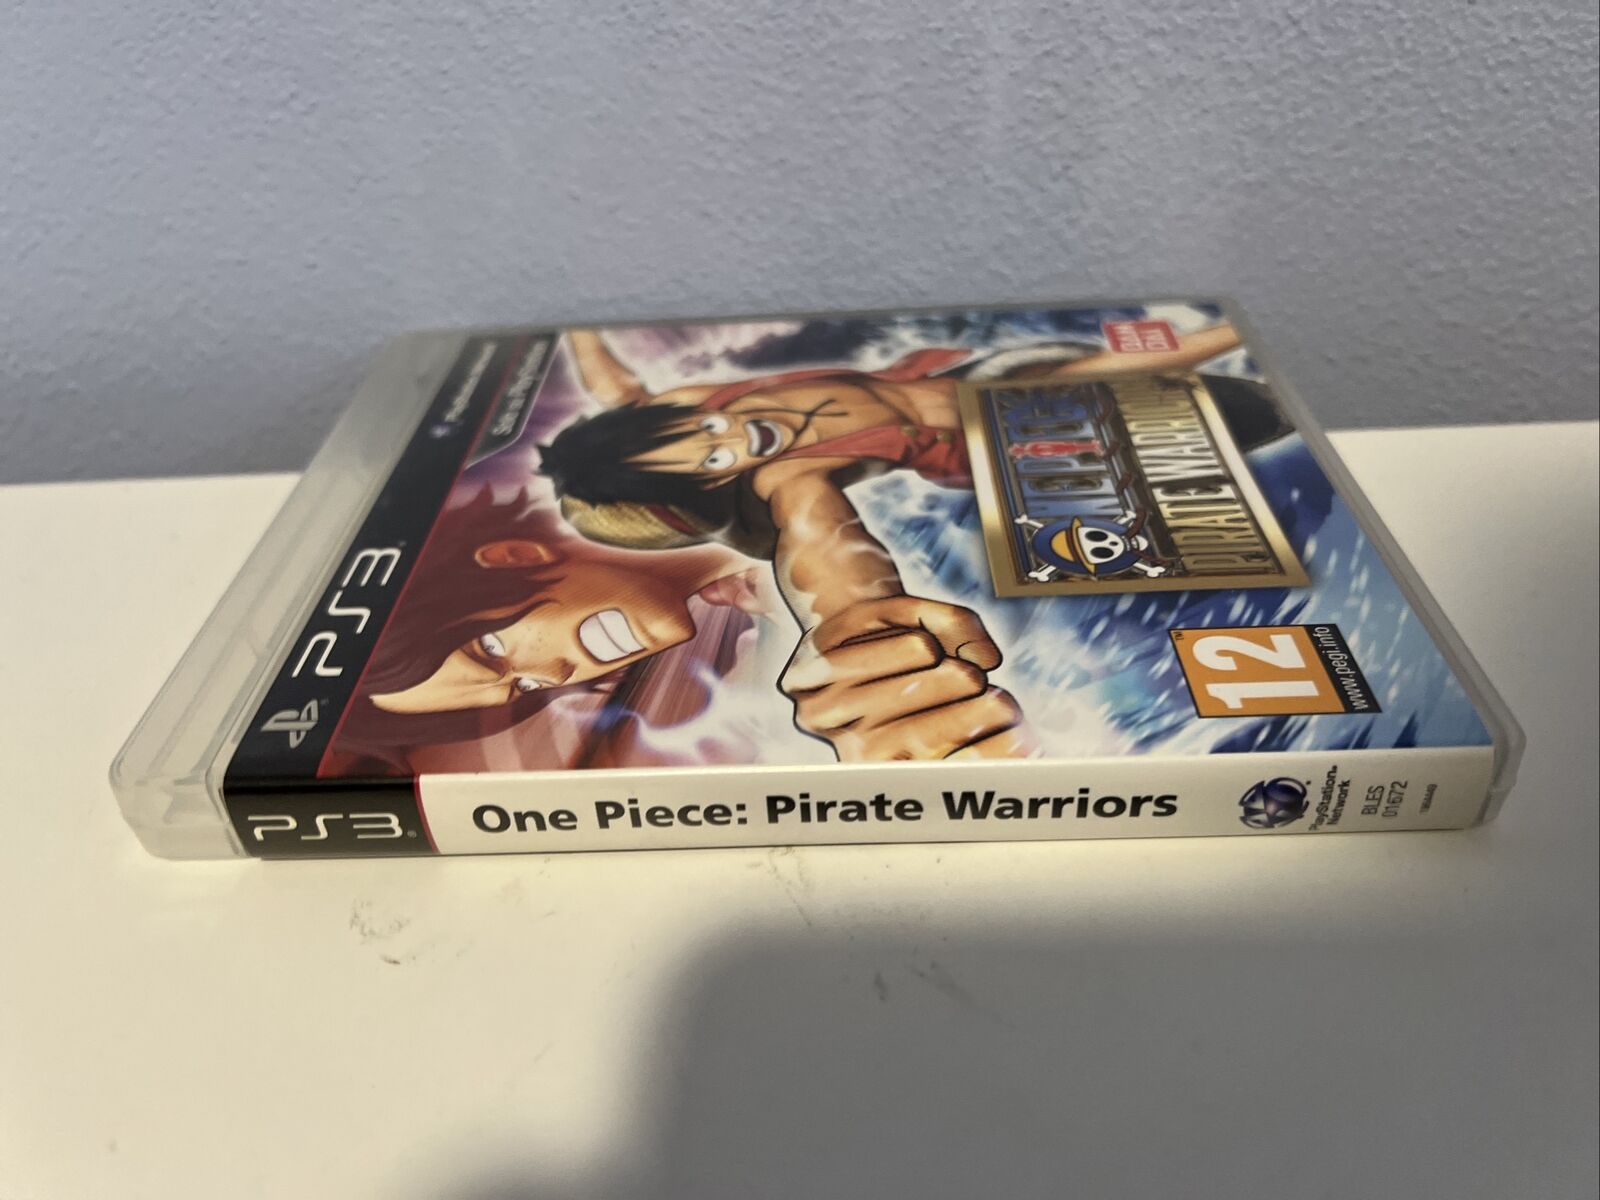 Ps3-videogame-One-Piece-Pirate-Warriors-Pal-Ita-144289208799-2